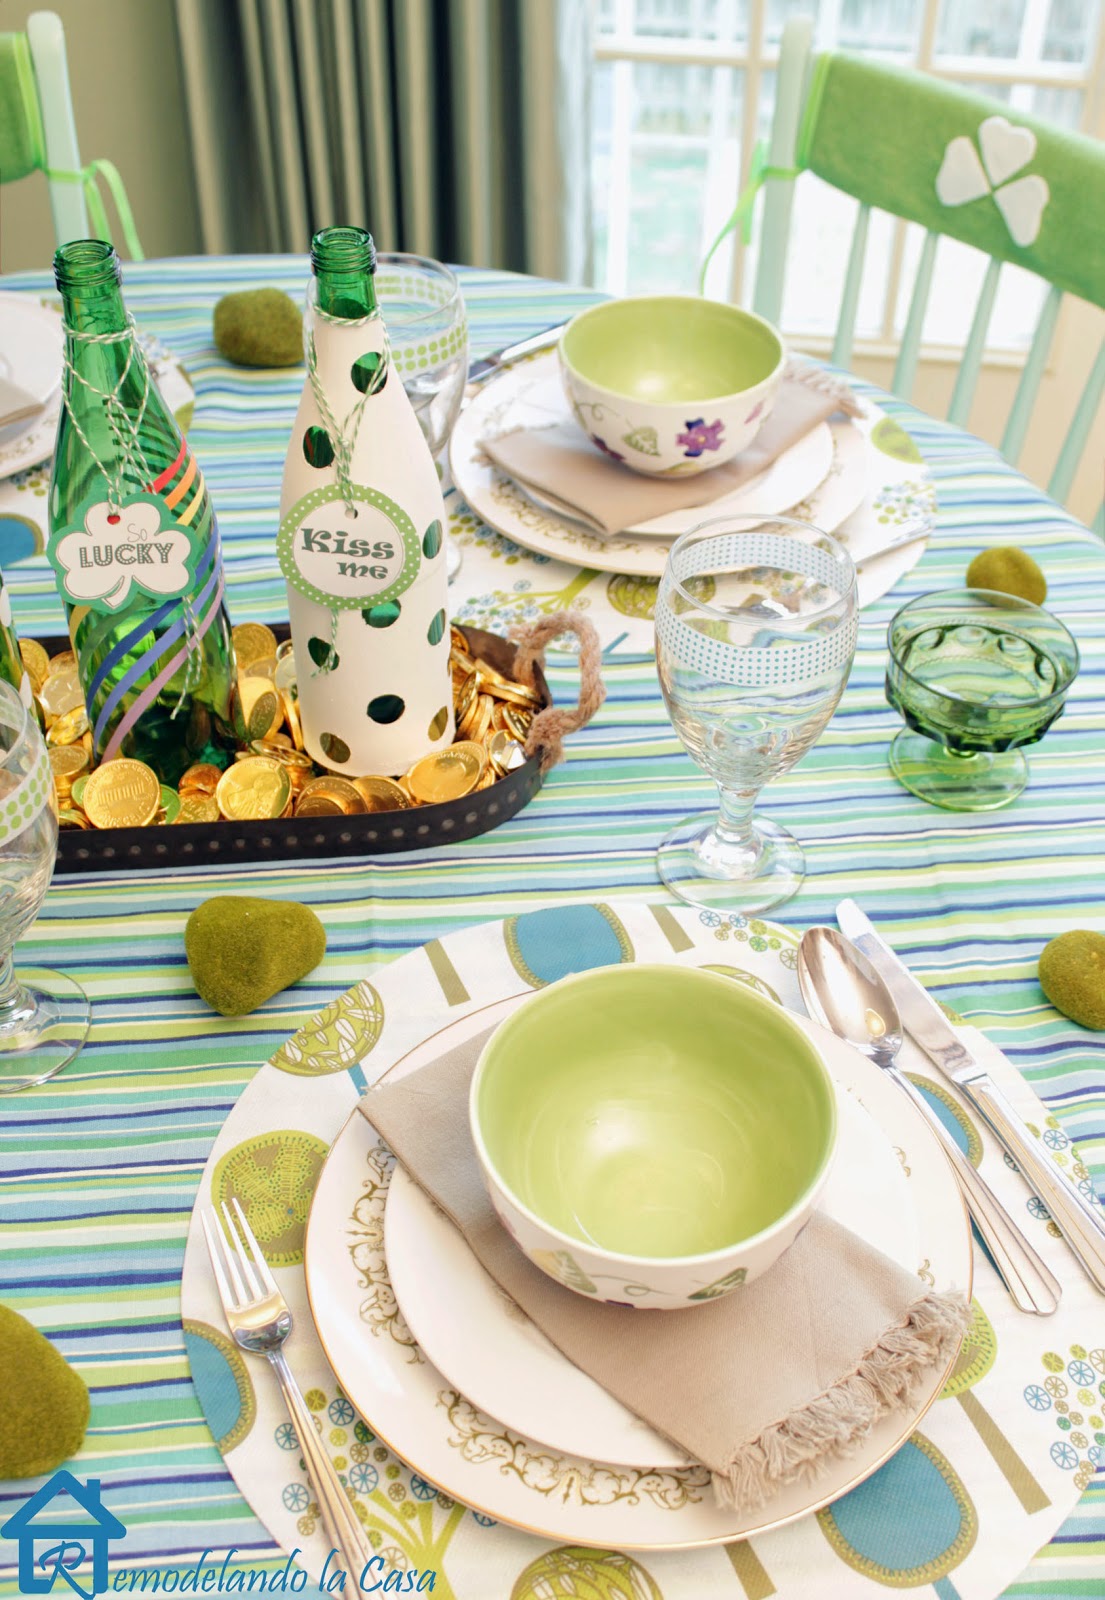 Green bottle centerpiece, plates and chair covers adorn a St. Paddy's table